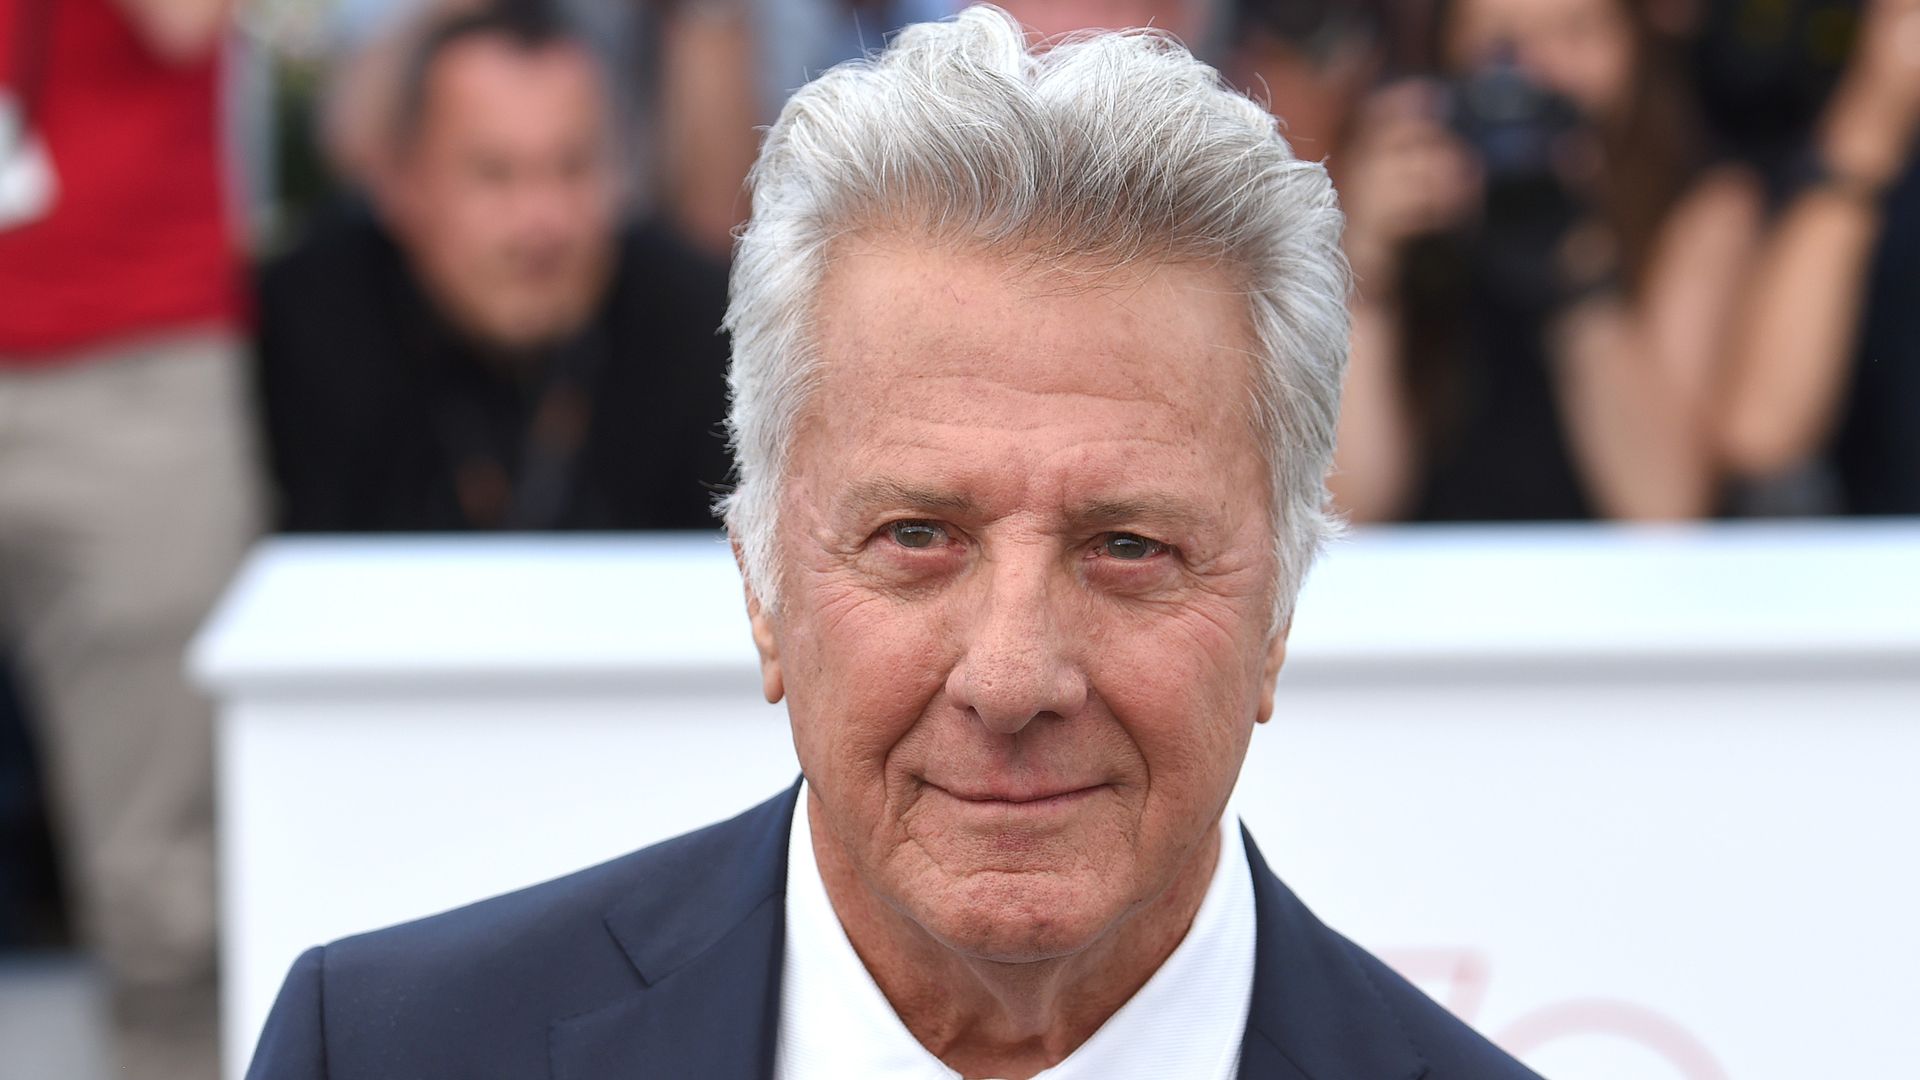 Dustin Hoffman attends the "The Meyerowitz Stories" Photocall during the 70th annual Cannes Film Festival at Palais des Festivals on May 21, 2017 in Cannes, France.